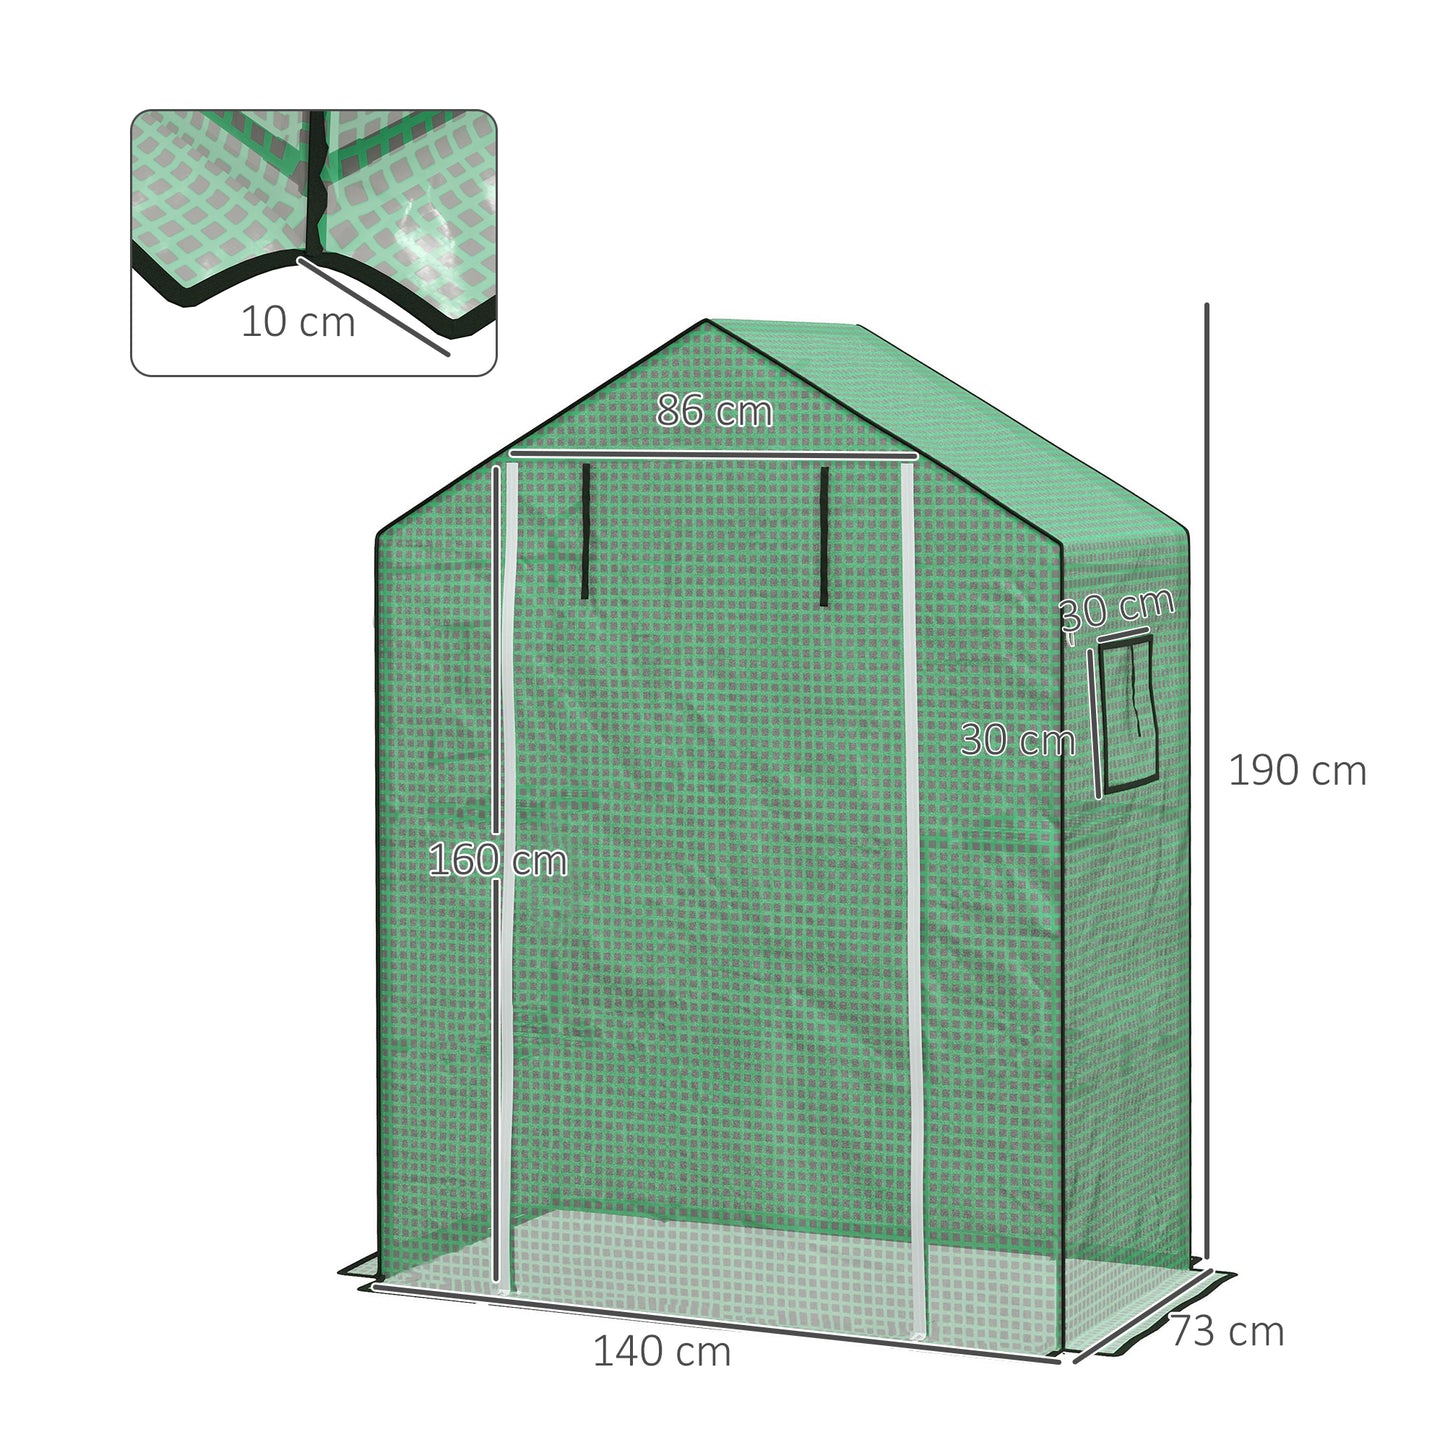 Outsunny Greenhouse Cover Replacement Walk-in PE Hot House Cover with Roll-up Door and Windows, 140 x 73 x 190cm, Green